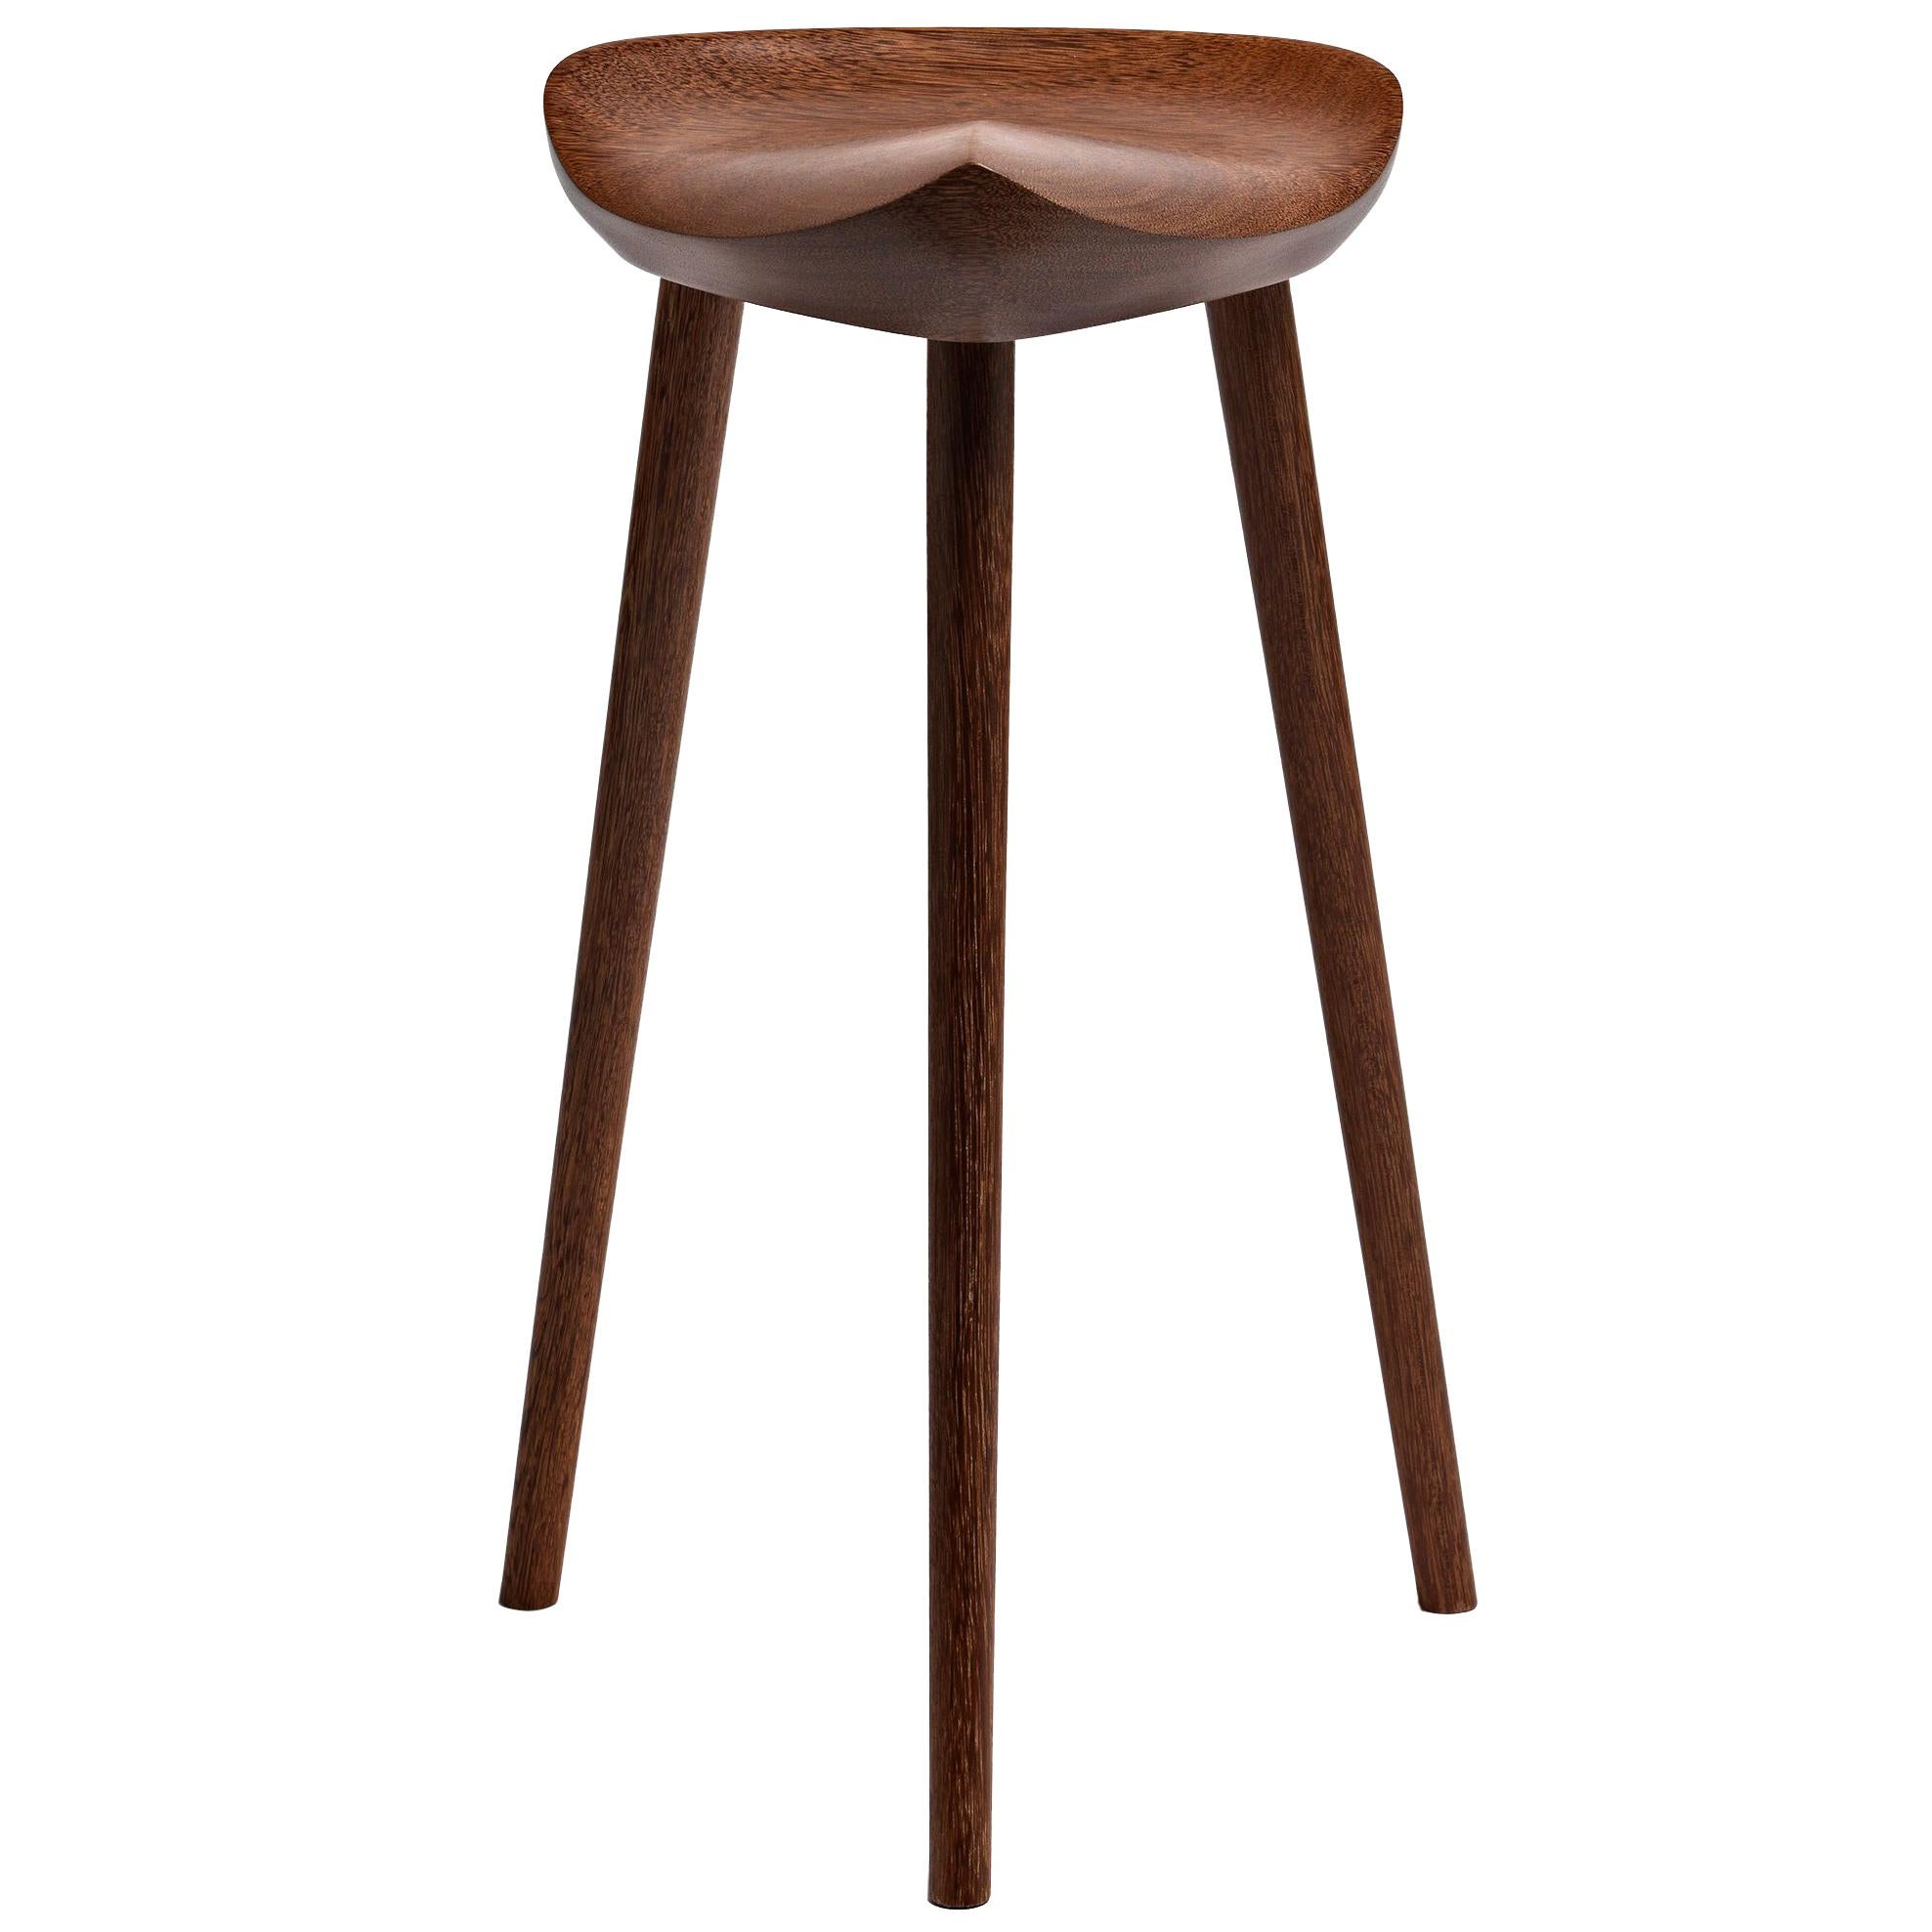 Hand-Carved Contemporary Stool in Brazilian Hardwood Design by Ricardo Graham Ferreira For Sale